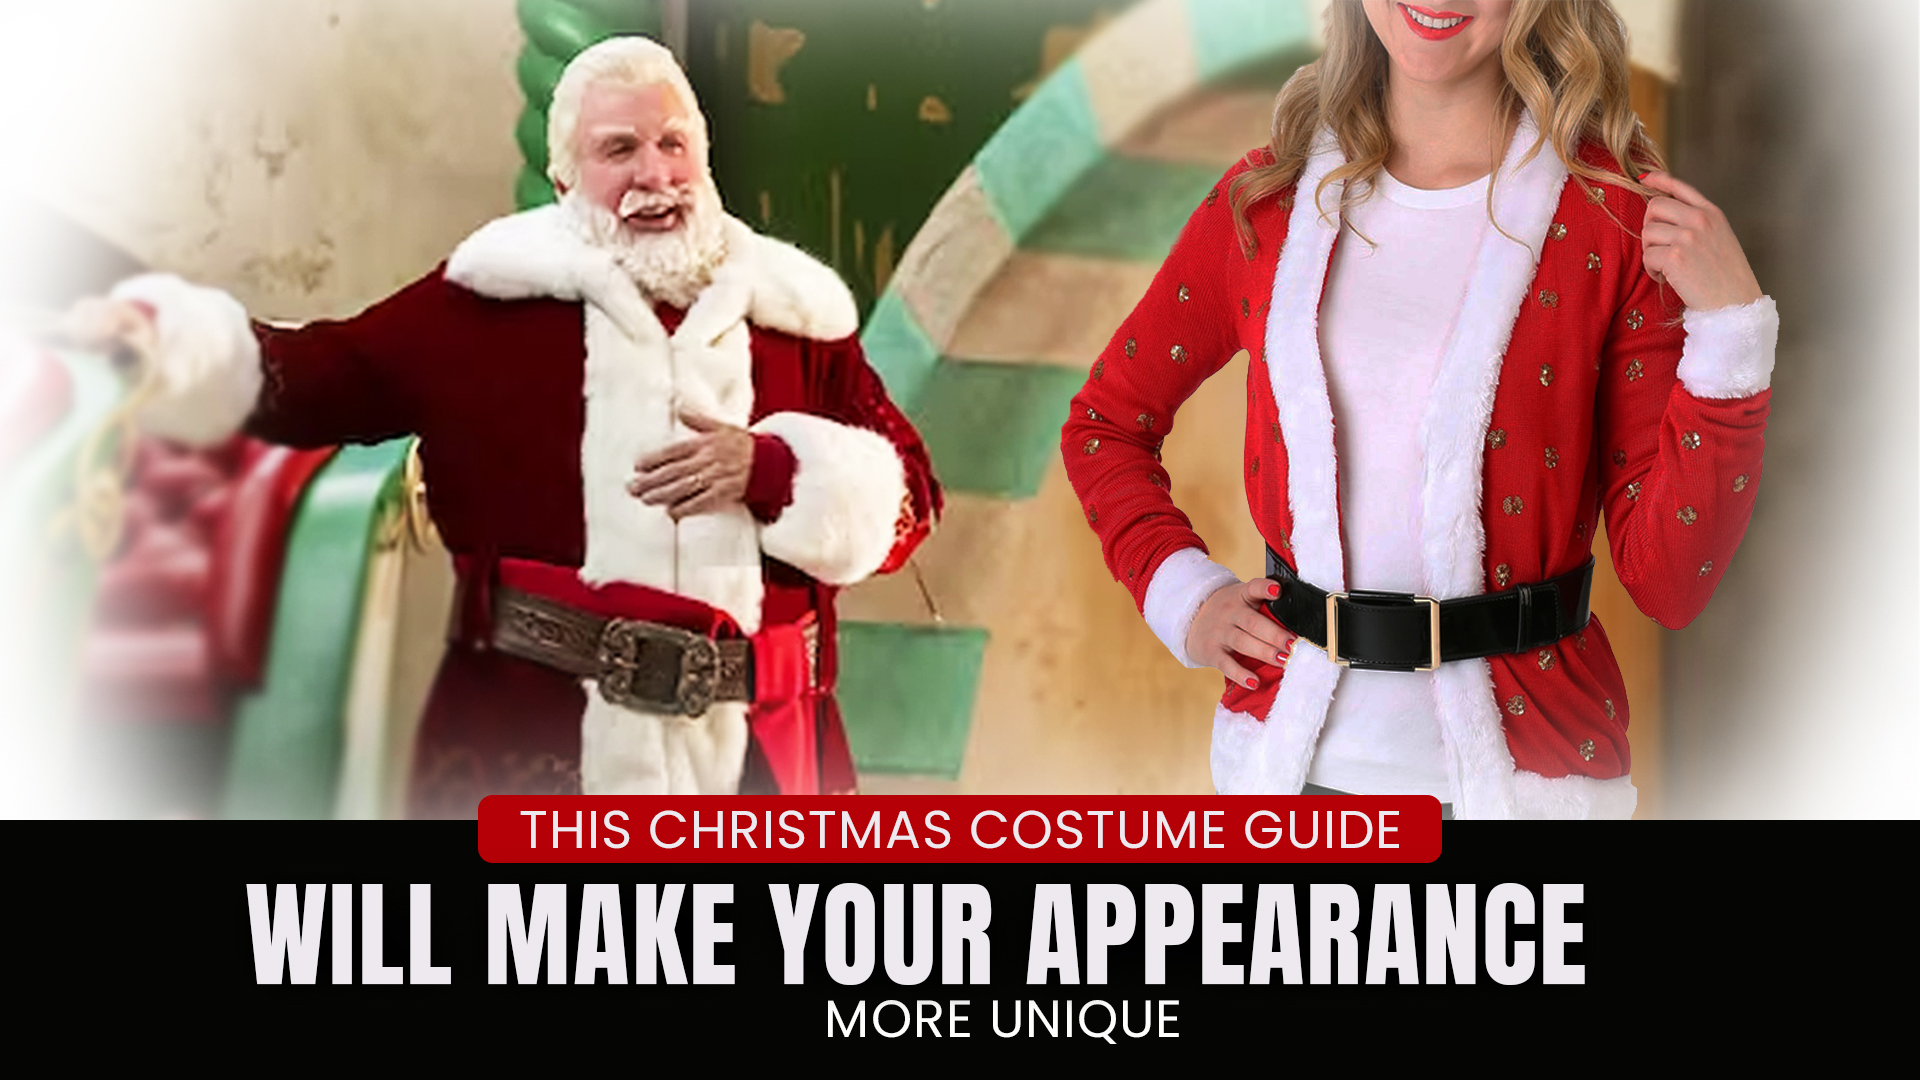 This Christmas Costume Guide Will Make Your Appearance More Unique